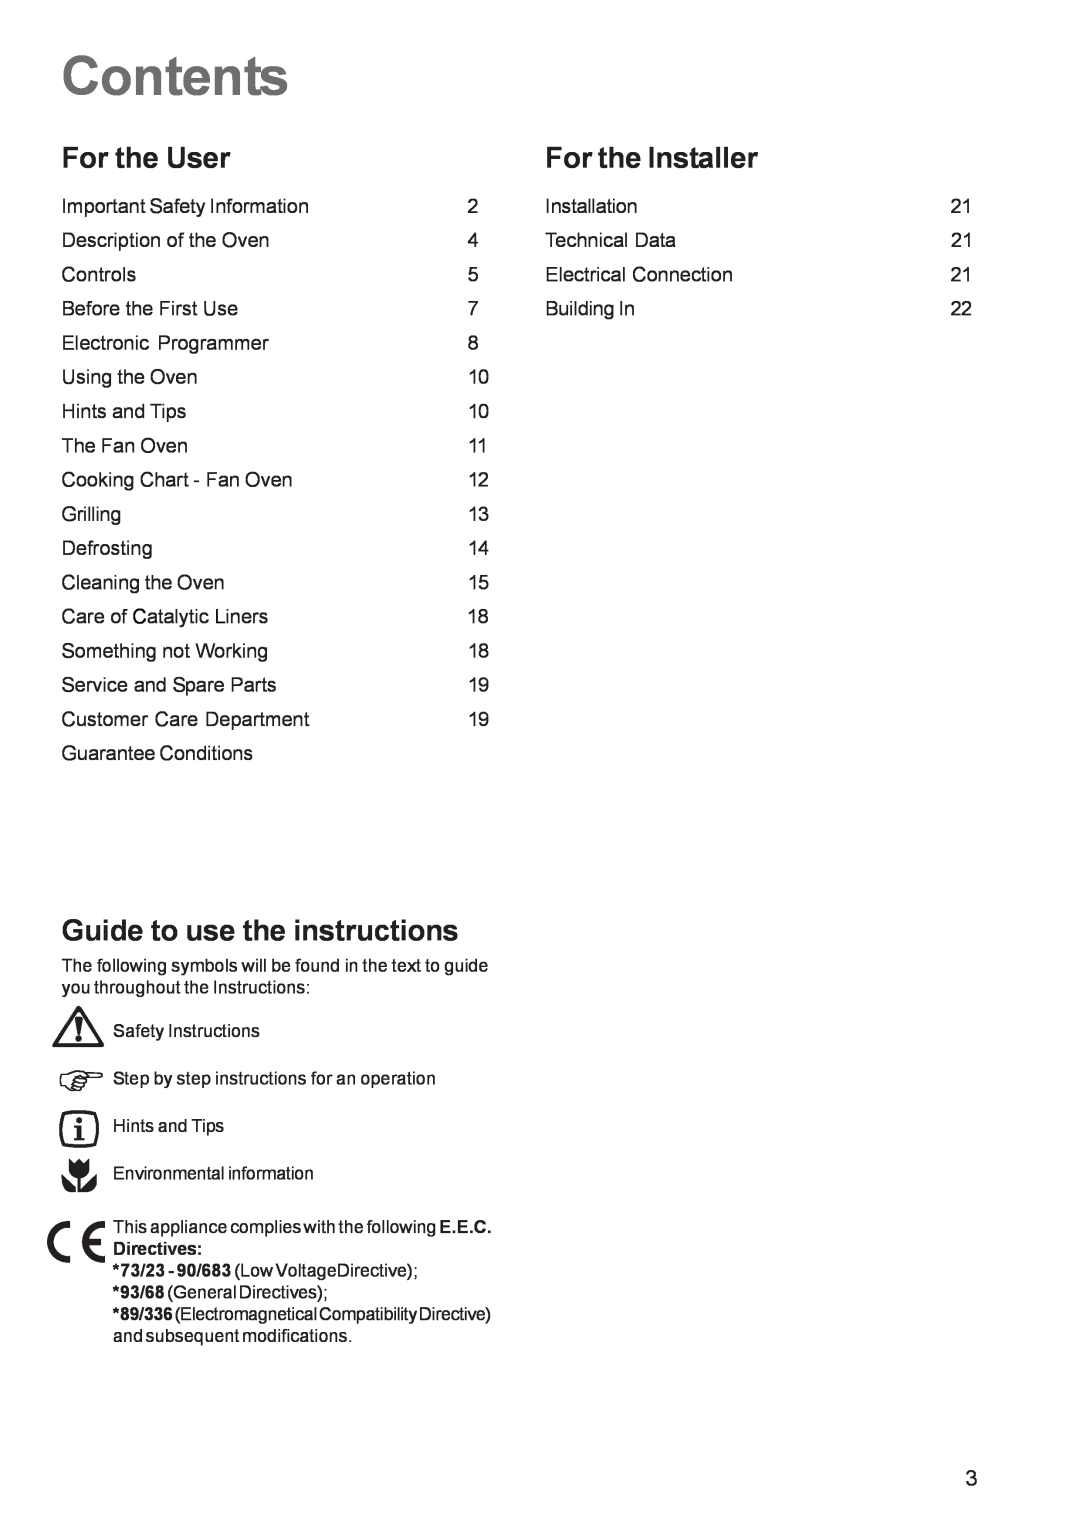 Zanussi ZBF 569 manual Contents, For the User, For the Installer, Guide to use the instructions 